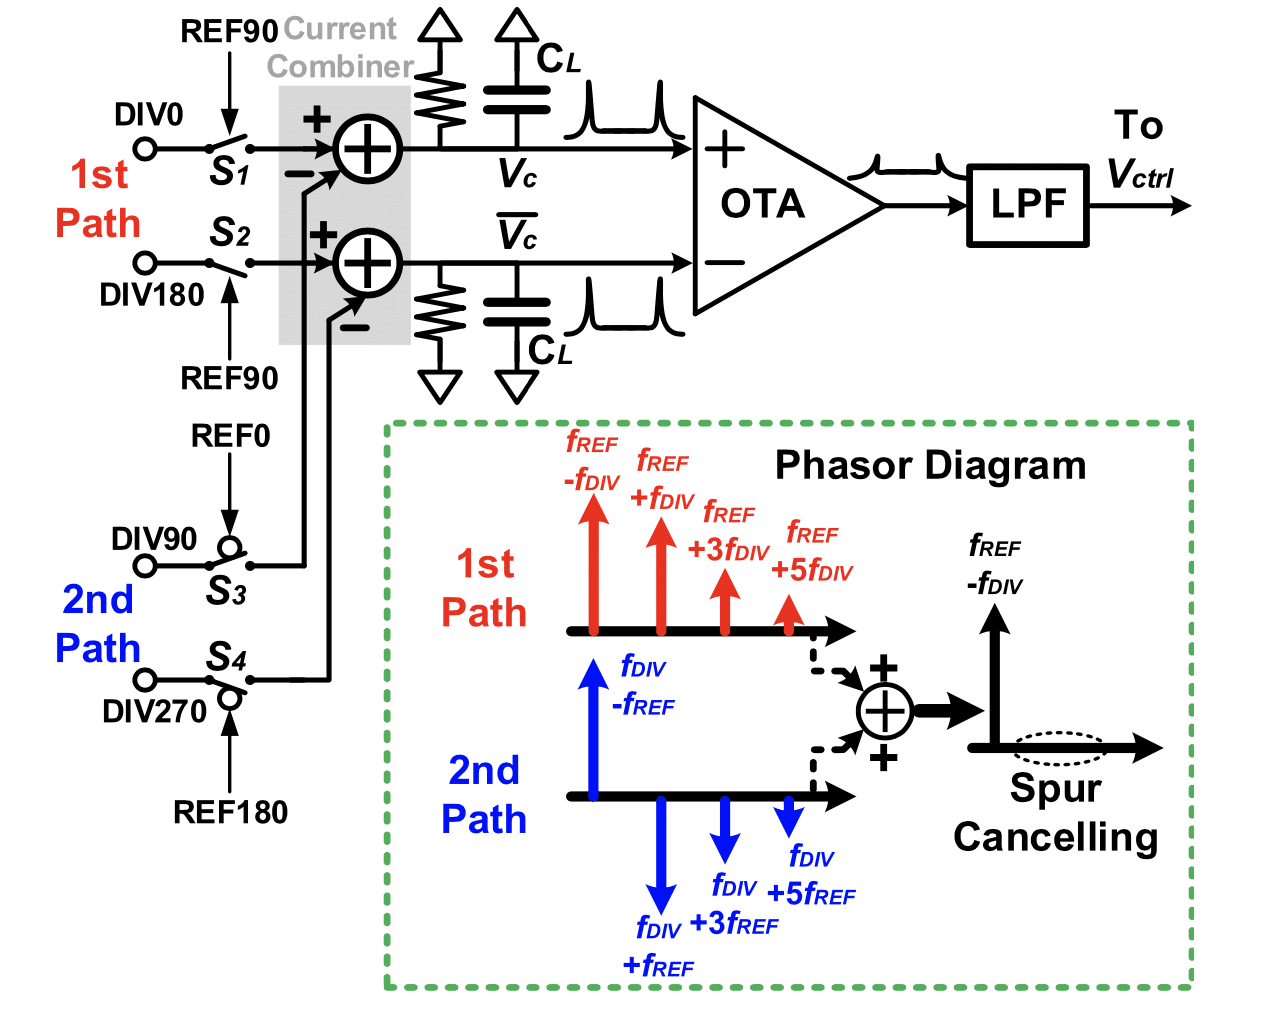 Spur Canceling Technique by Folded xor Gate Phase Detector and Its Application to a Millimeter-Wave SiGe BiCMOS PLL